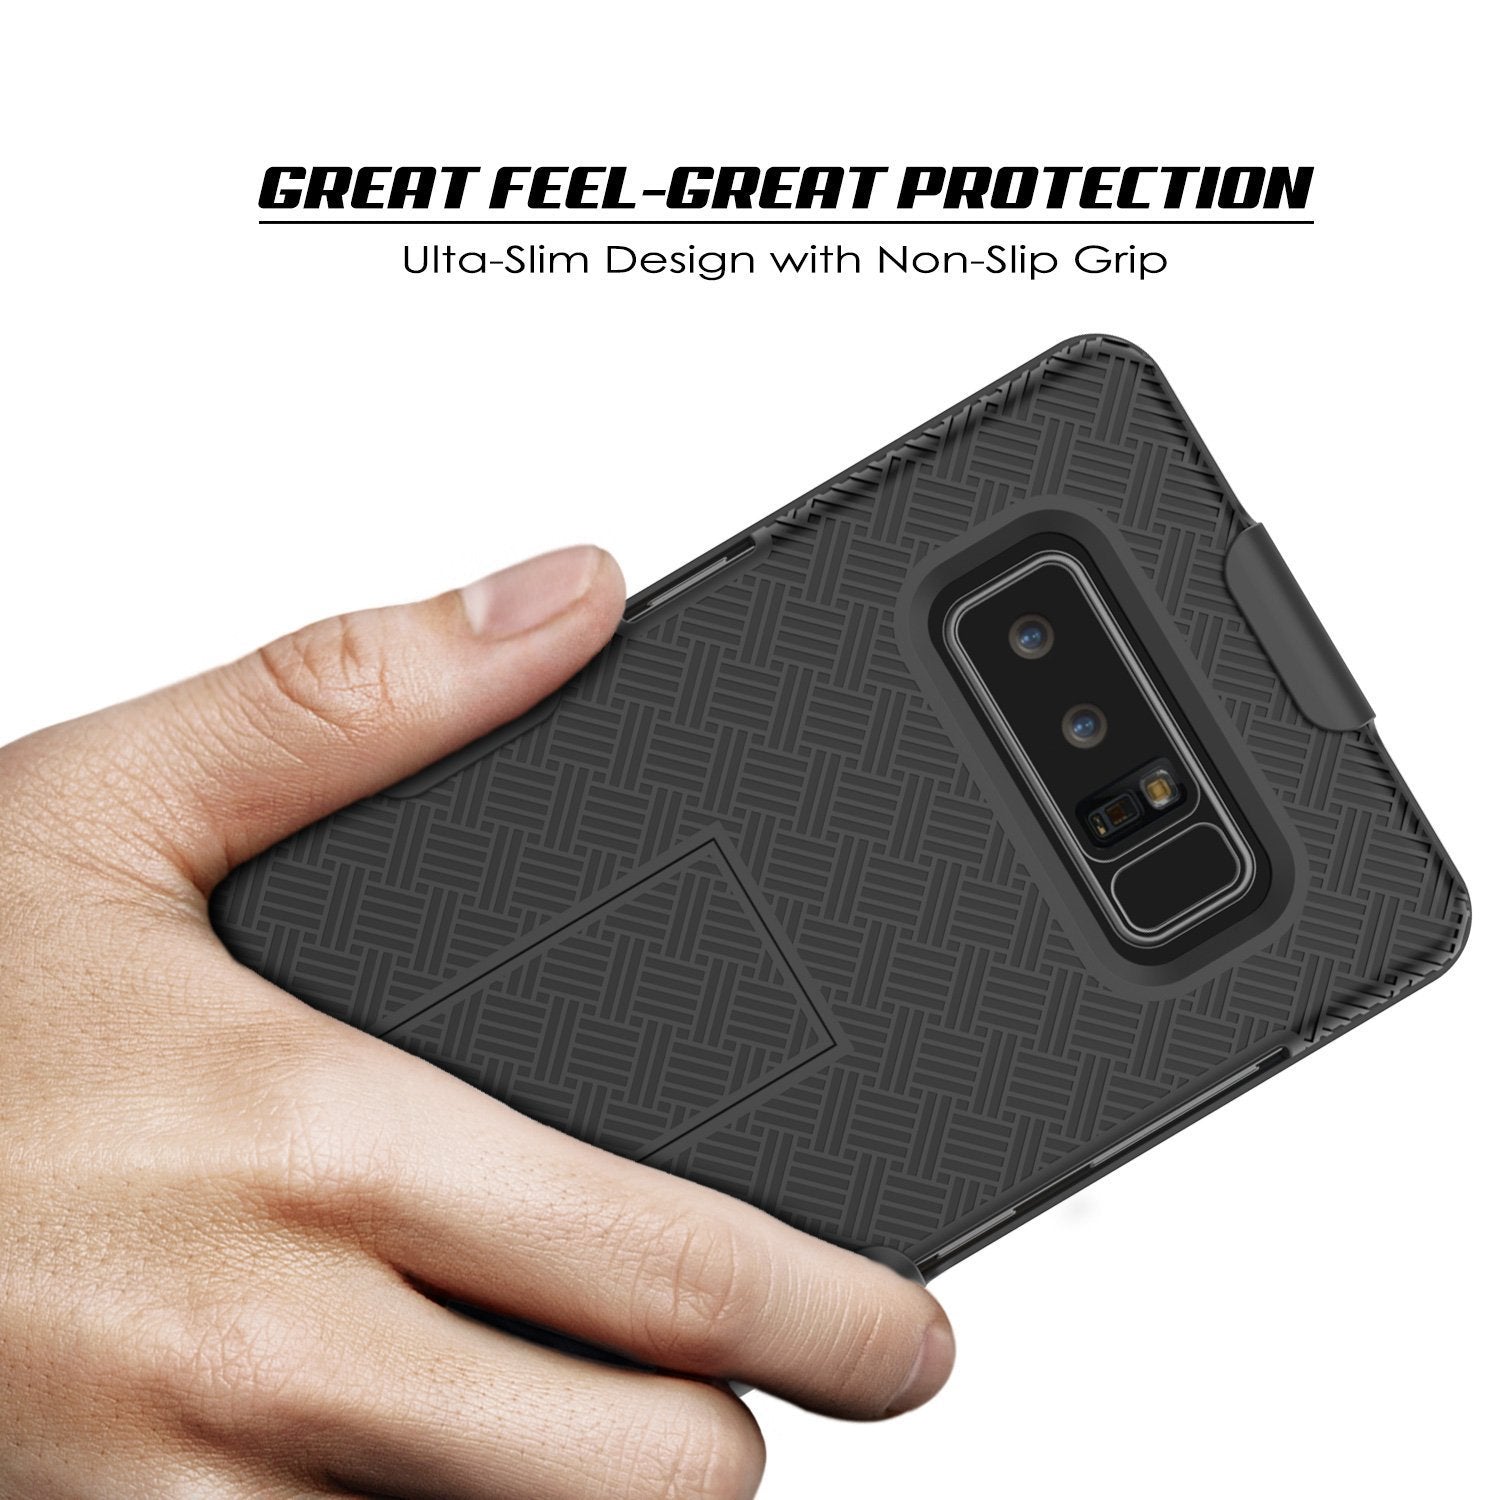 Punkcase Galaxy Note 8 Case, With PunkShield Glass Screen Protector, Holster Belt Clip & Built-In Kickstand Non-Slip Dual Layer Hybrid TPU Full Body Protection for Samsung Note 8 [Black]